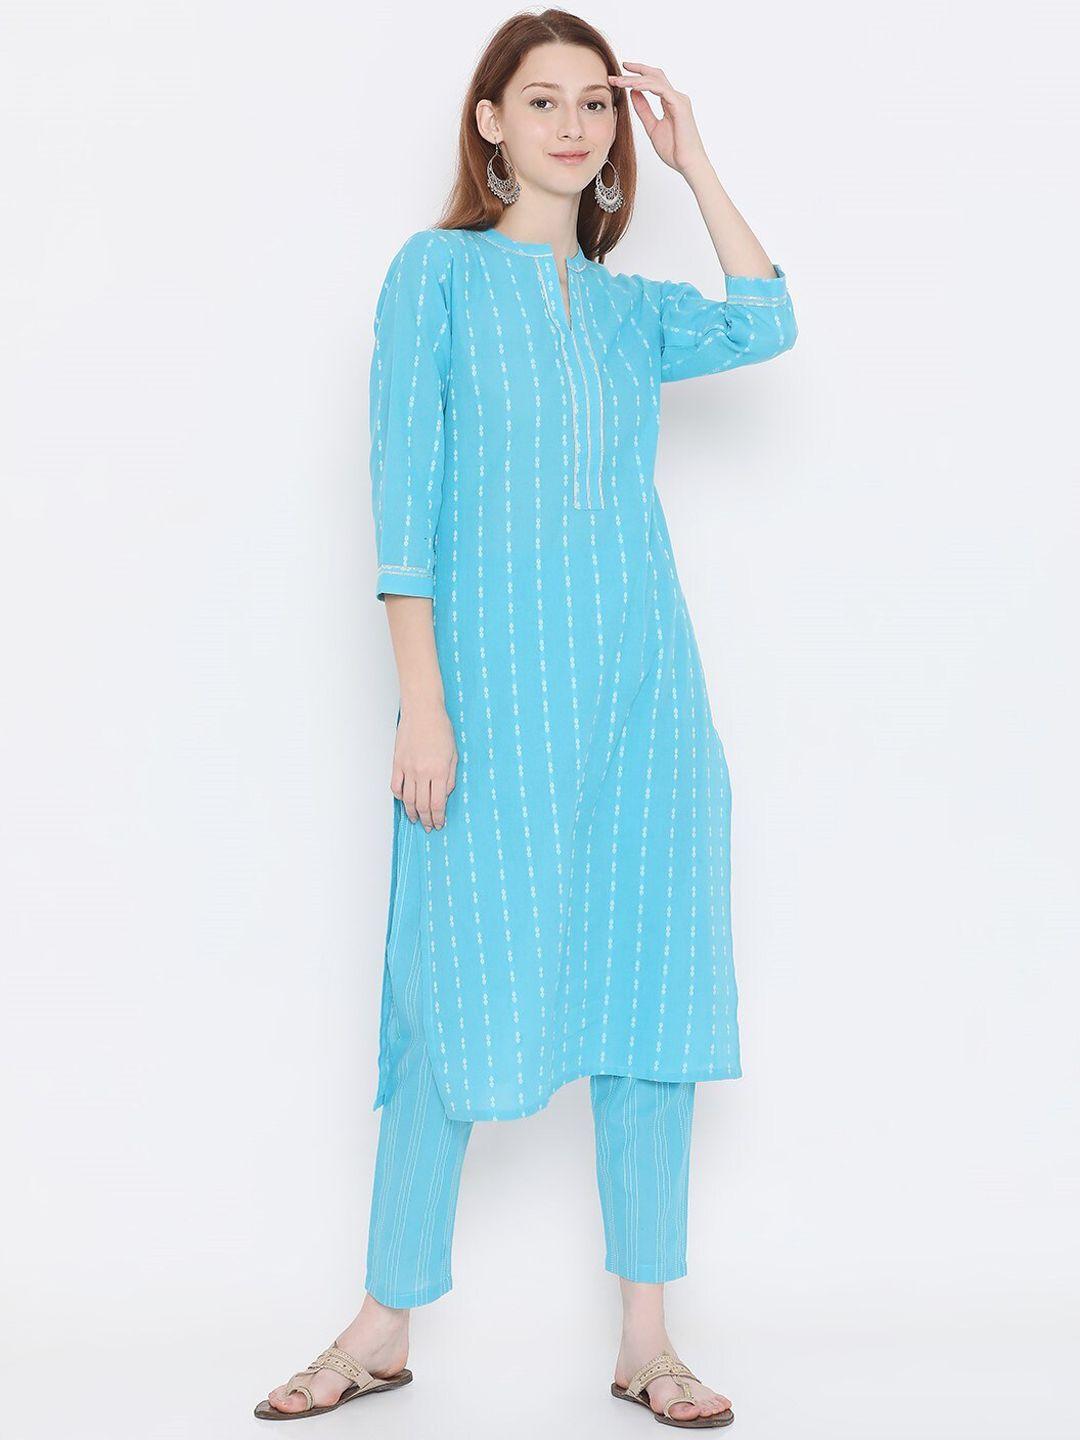 present creation ethnic motifs woven design pure cotton straight kurta with trousers